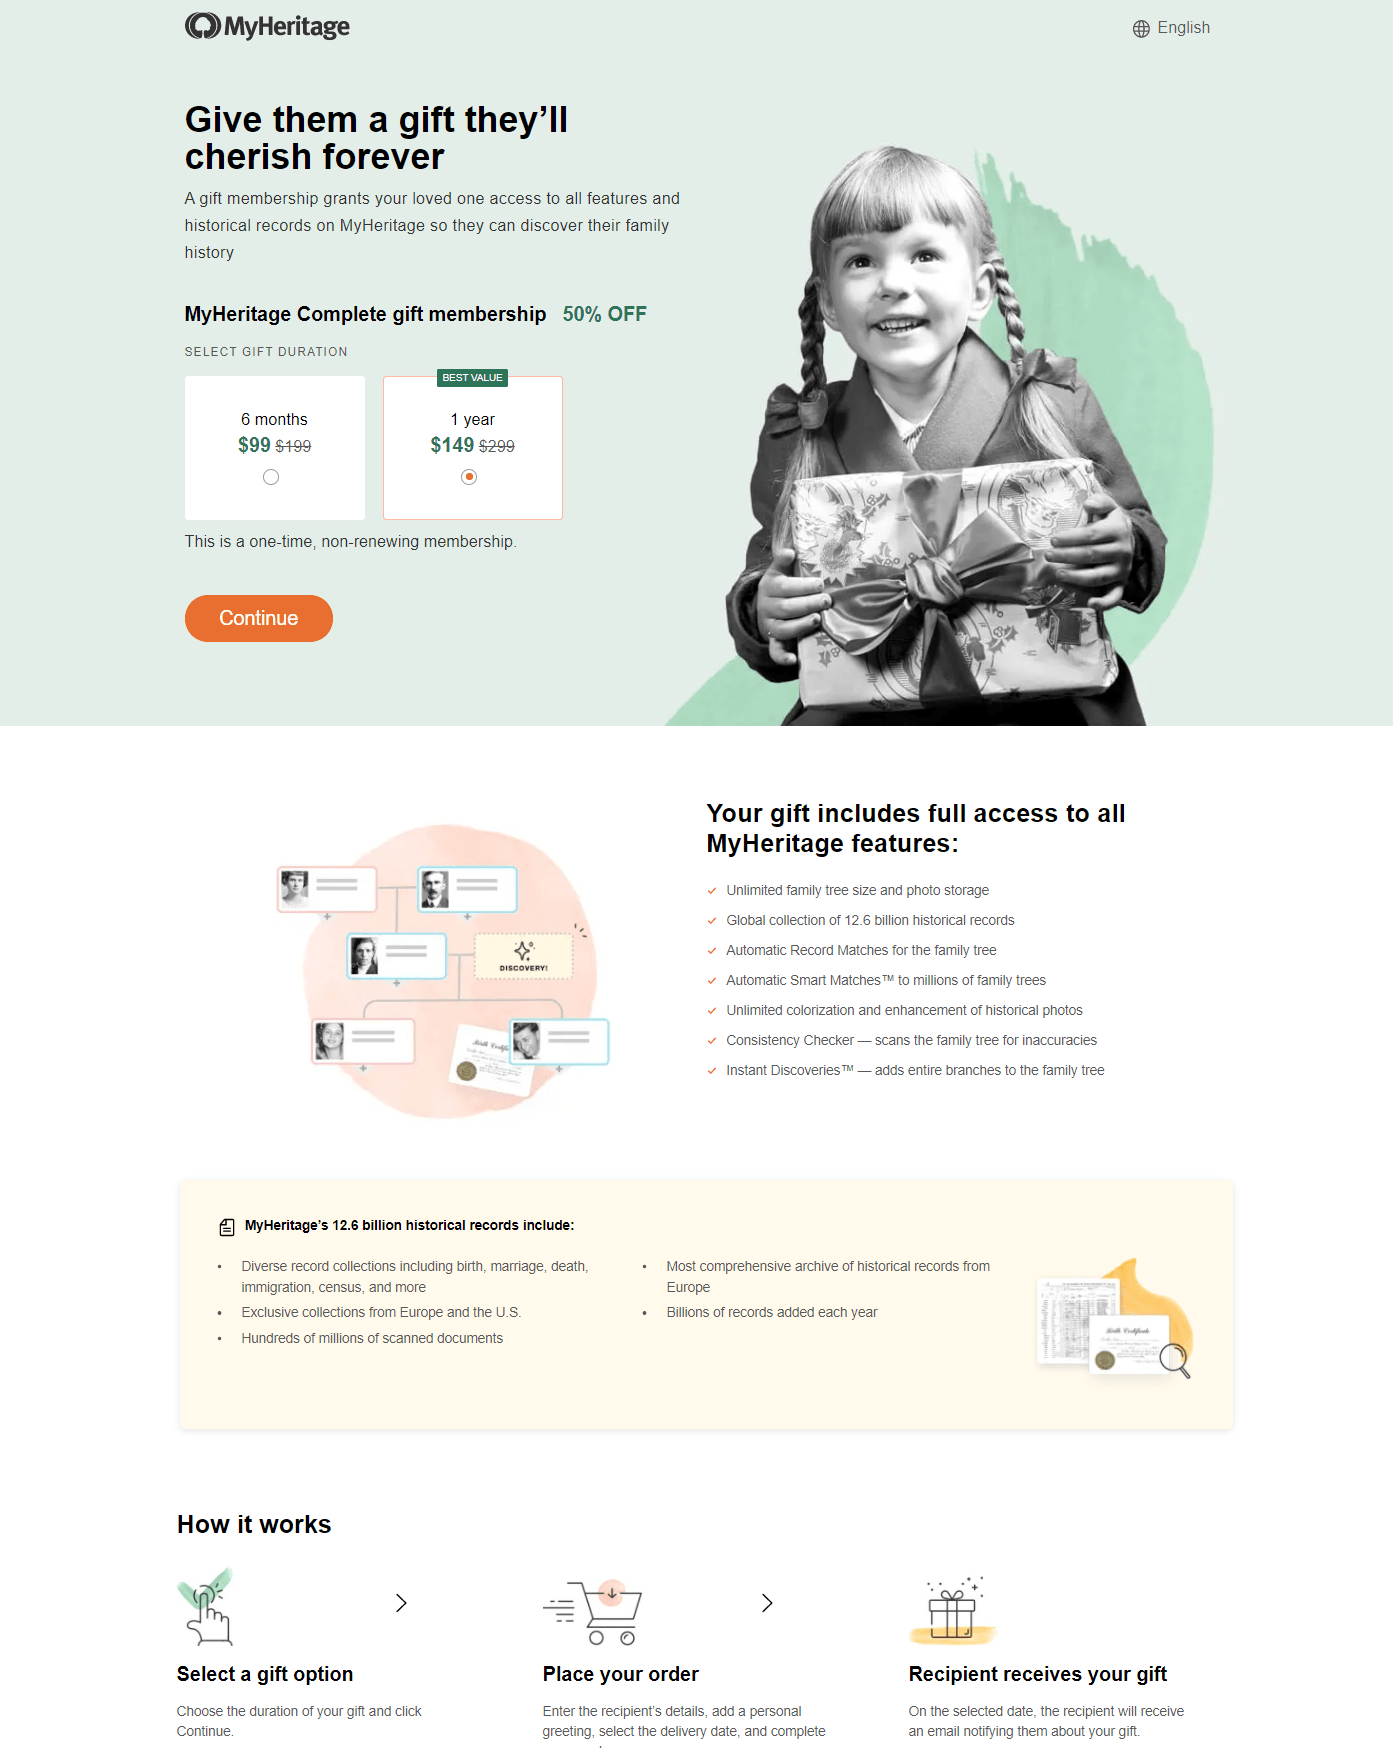 Giving a gift on https://www.myheritage.com/gift